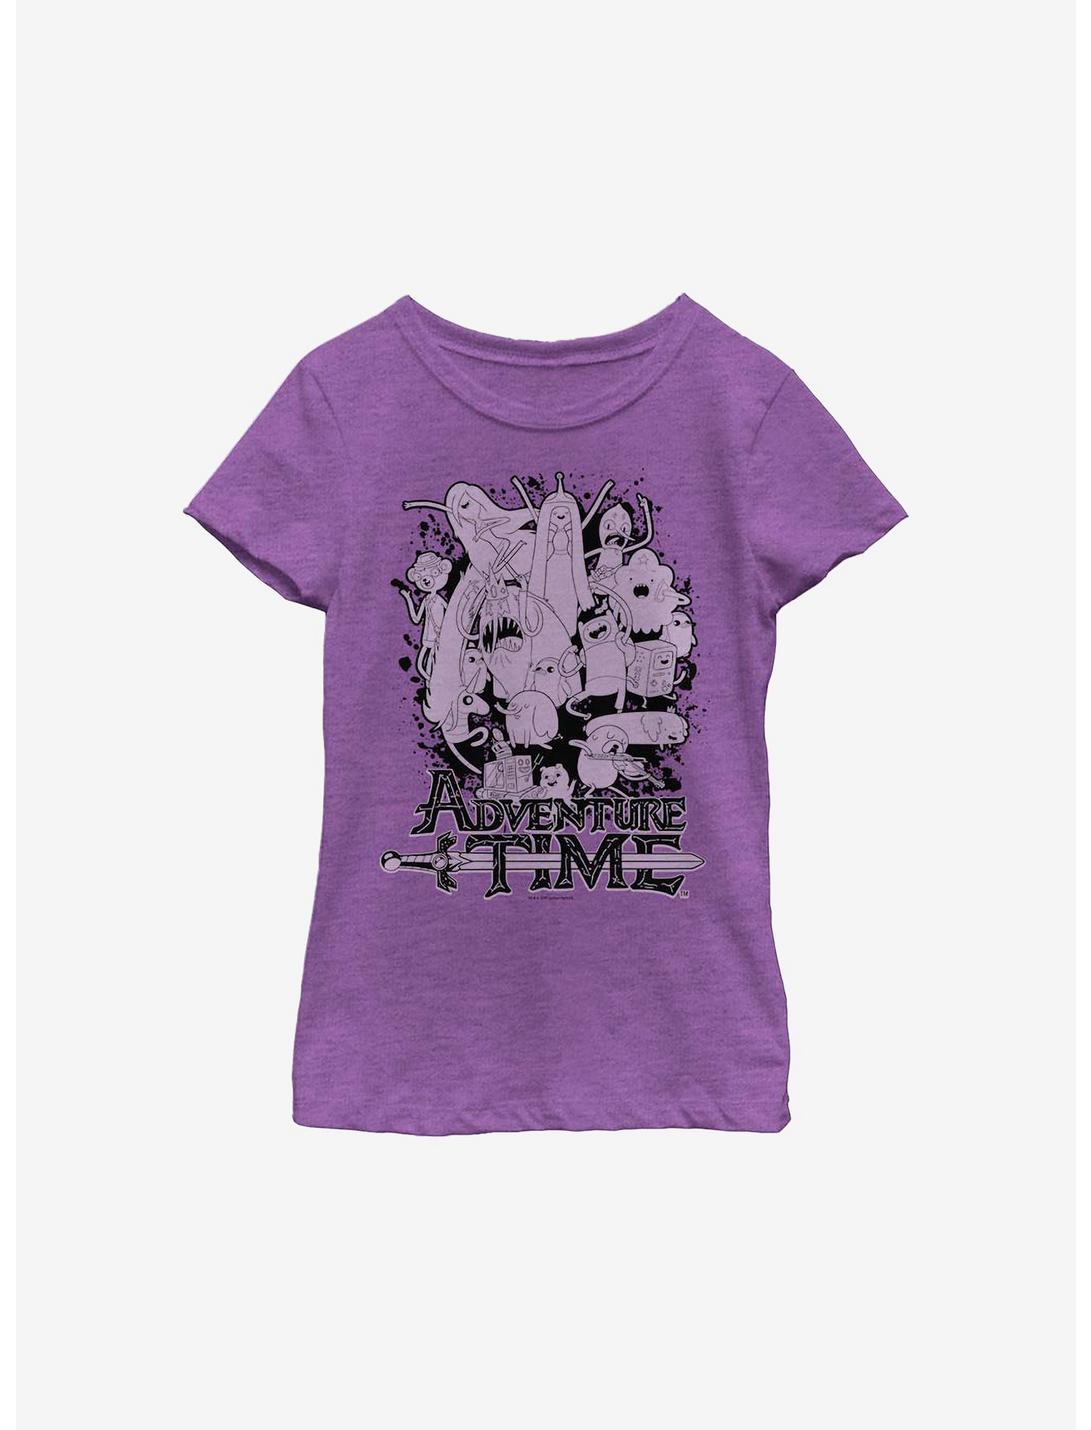 Adventure Time Group Splat Youth Girls T-Shirt, PURPLE BERRY, hi-res